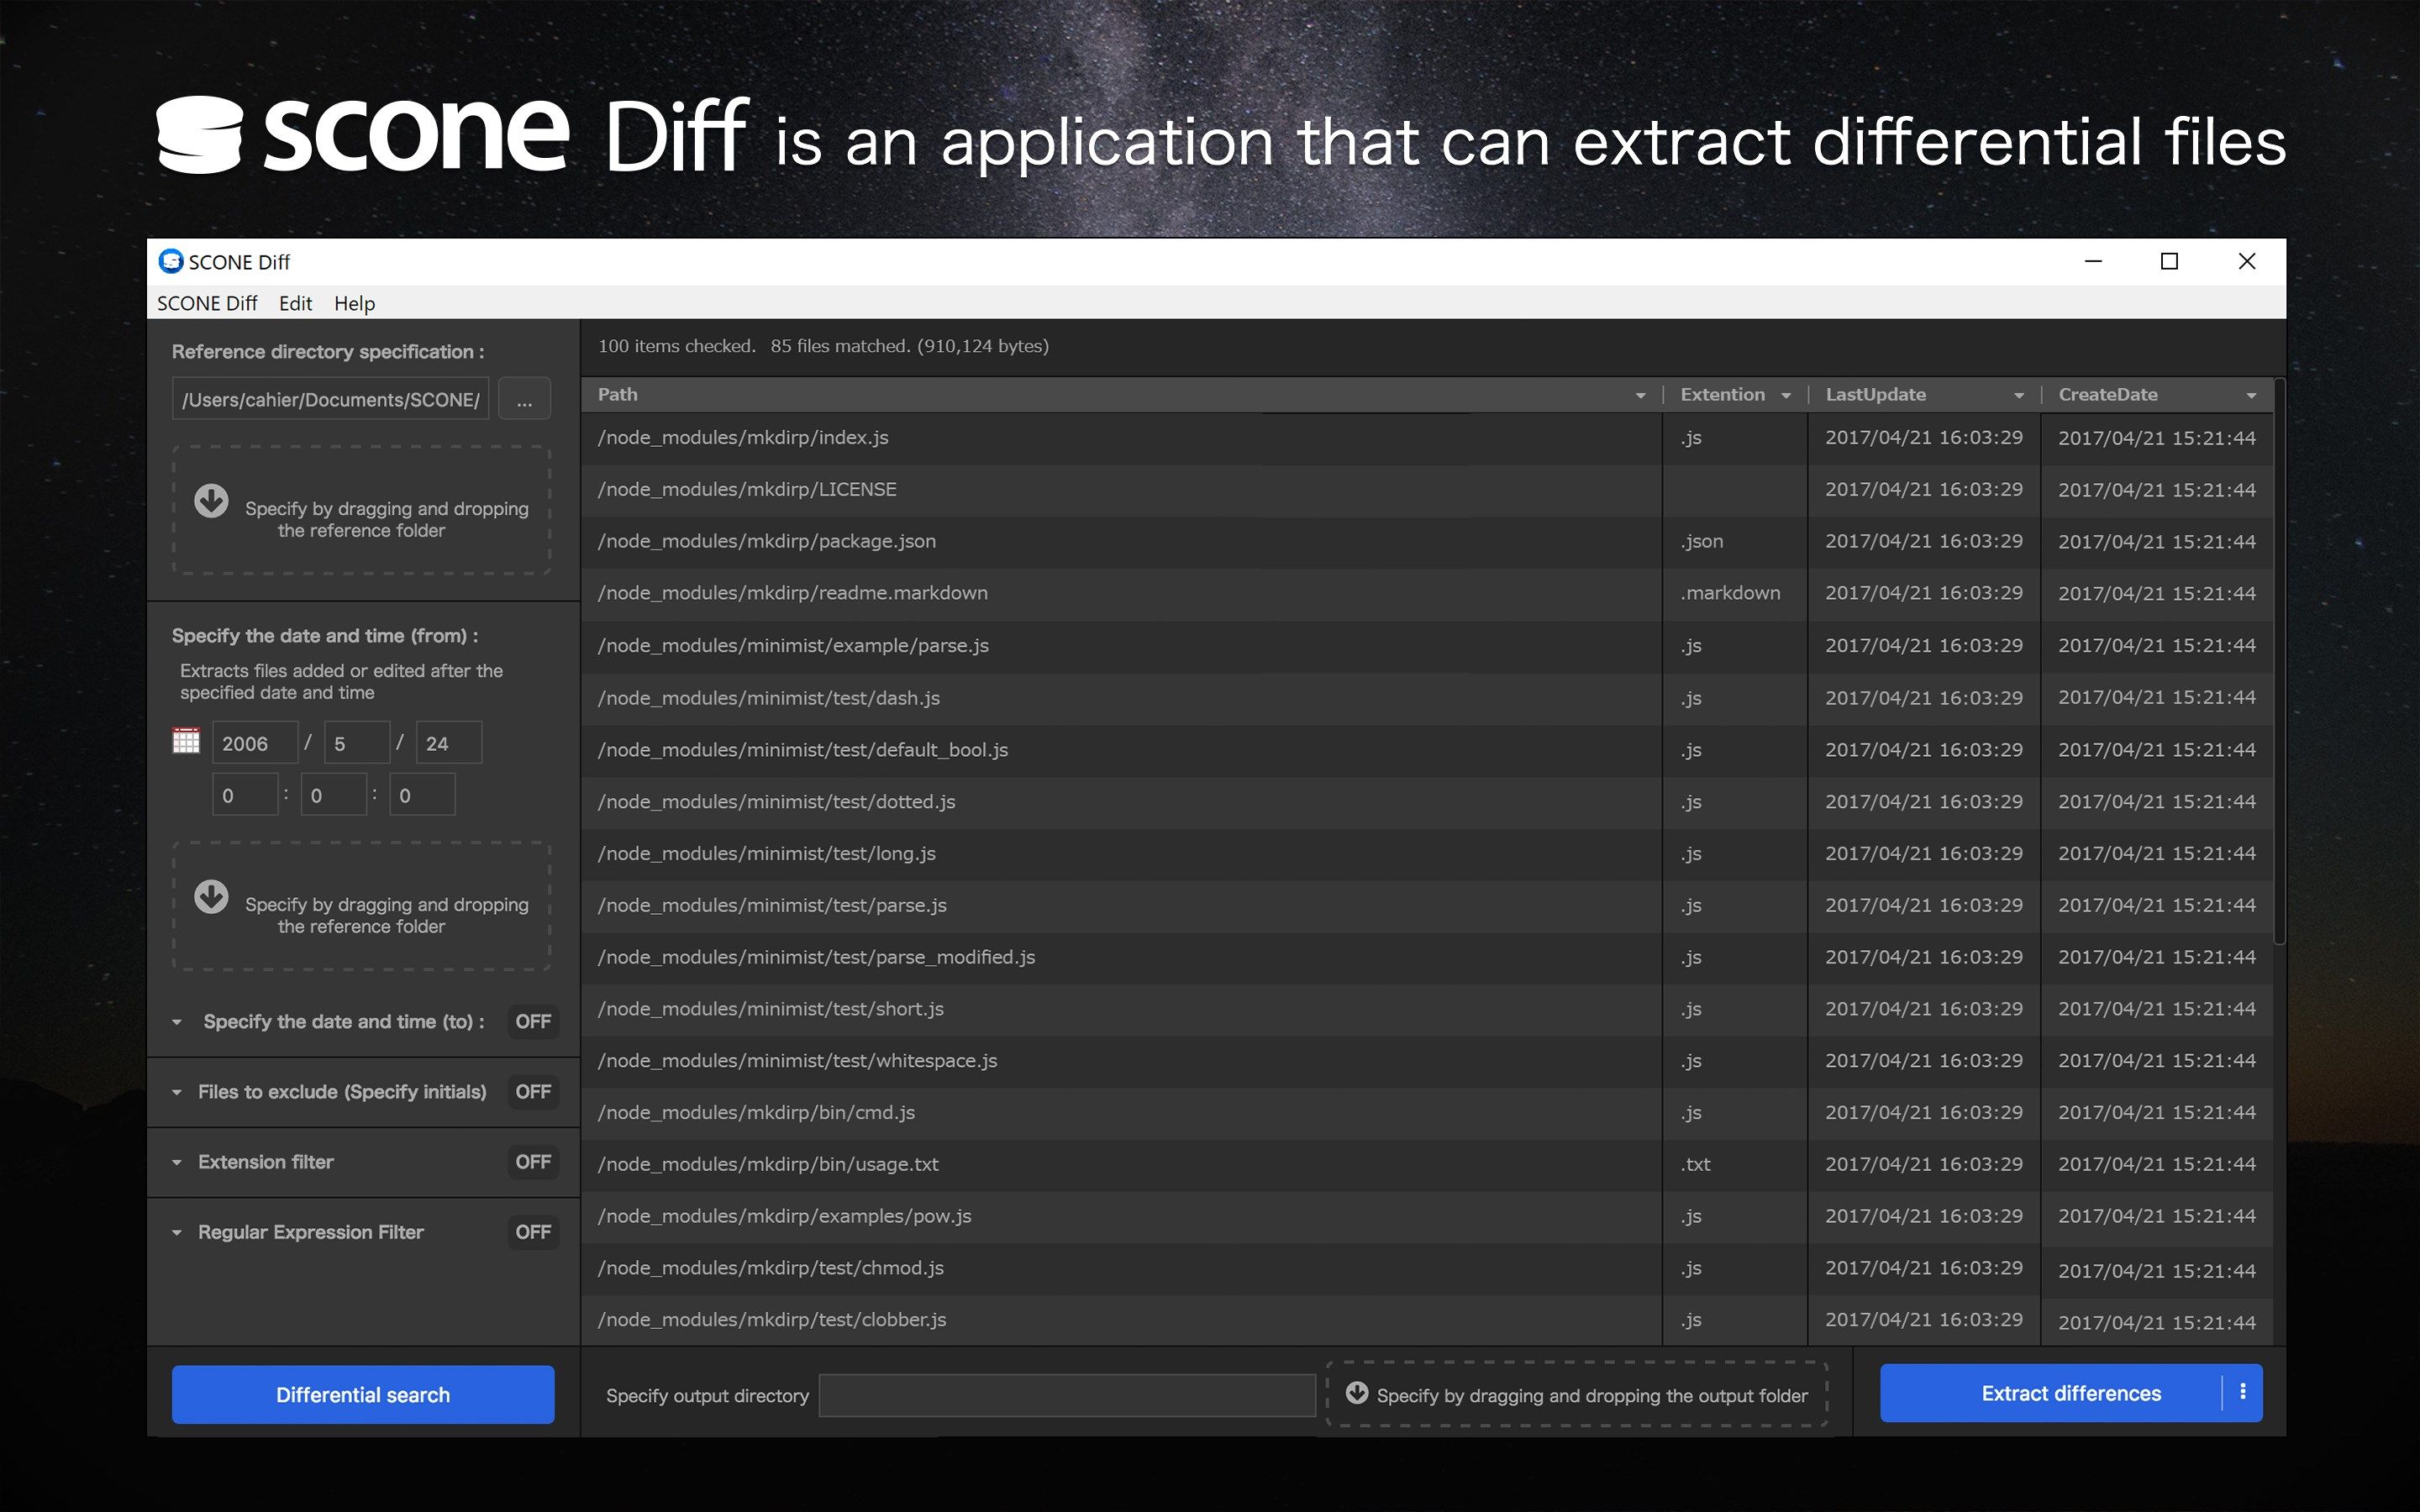 SCONE Diff is an application that can extract differential files.